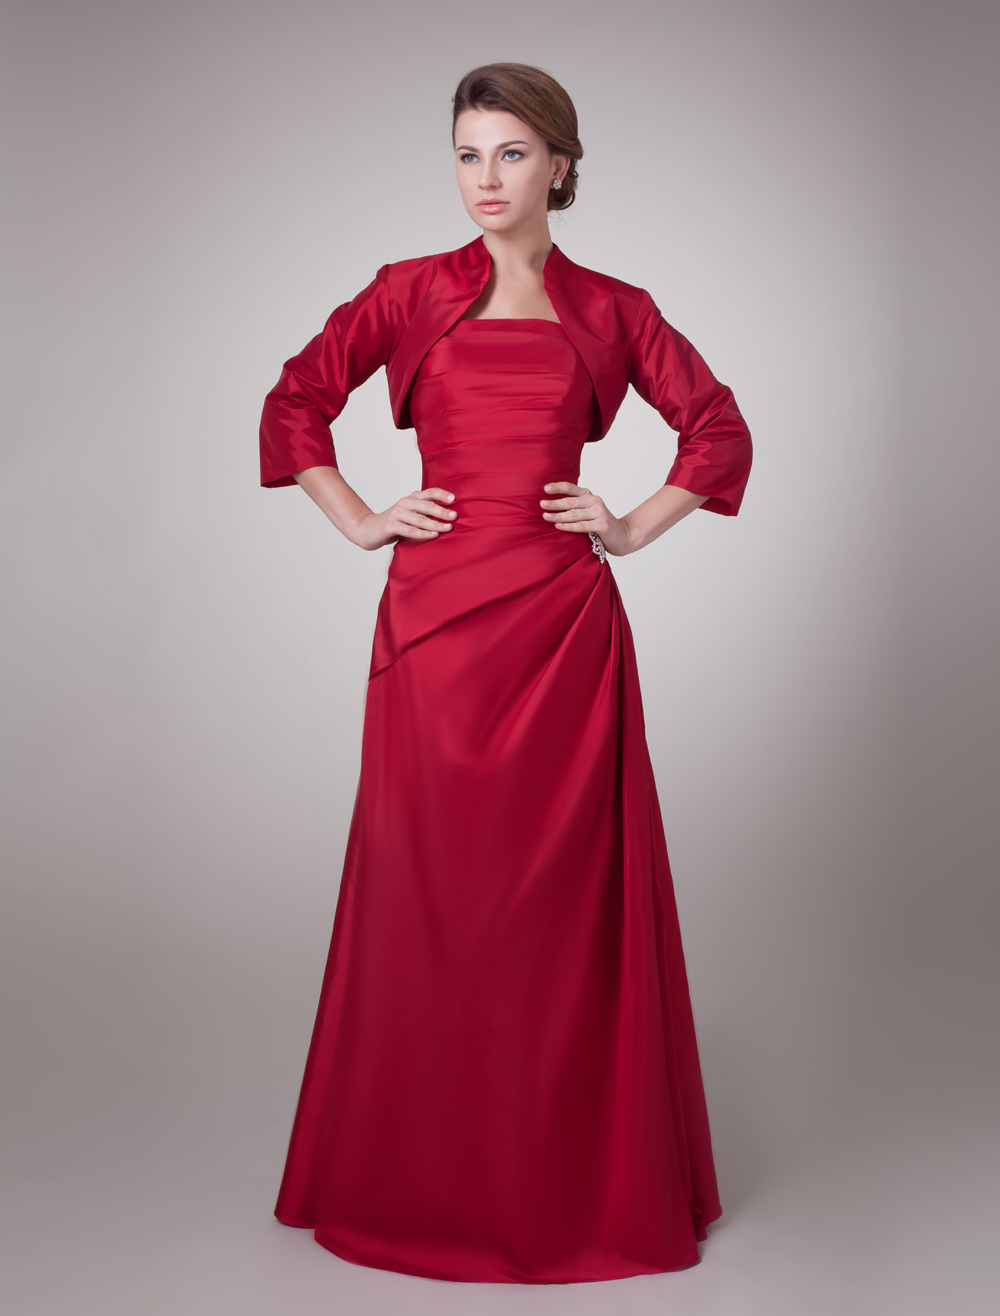 Strapless Ruched Dress With 3/4 Length Sleeves For Mother of Bride Wedding Guest Dress photo